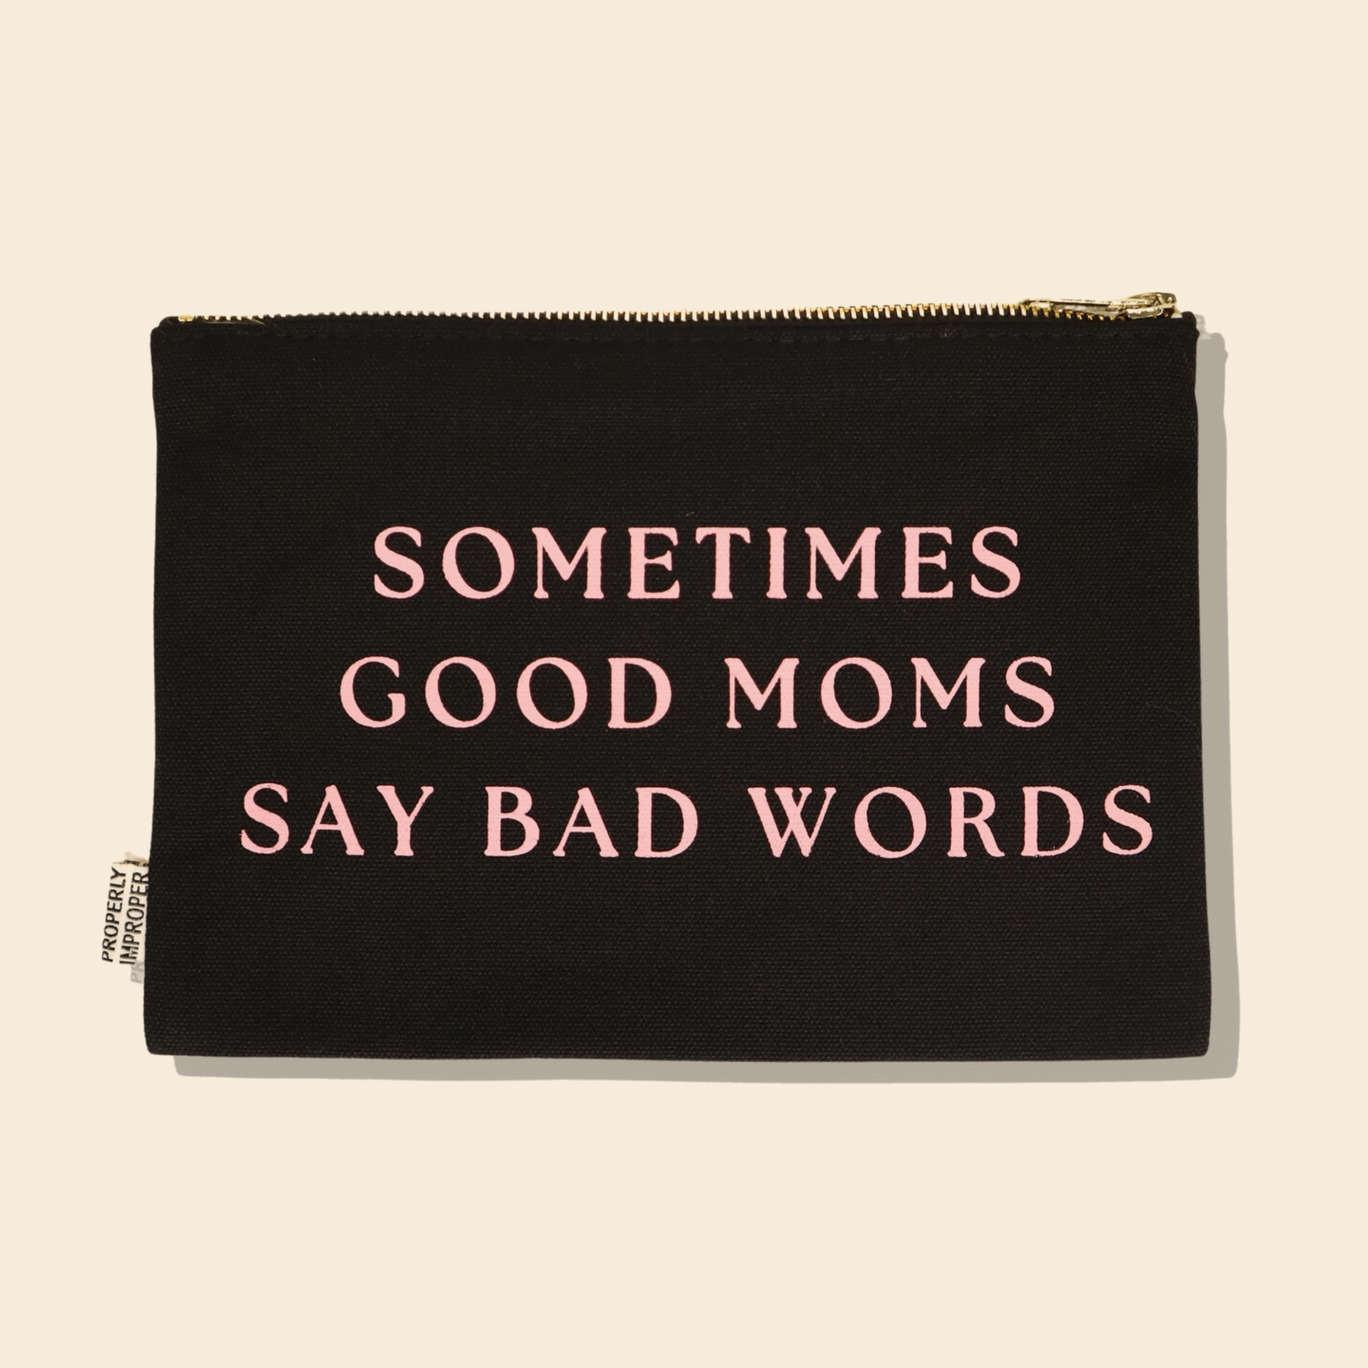 Good Moms Say Bad Words Pouch